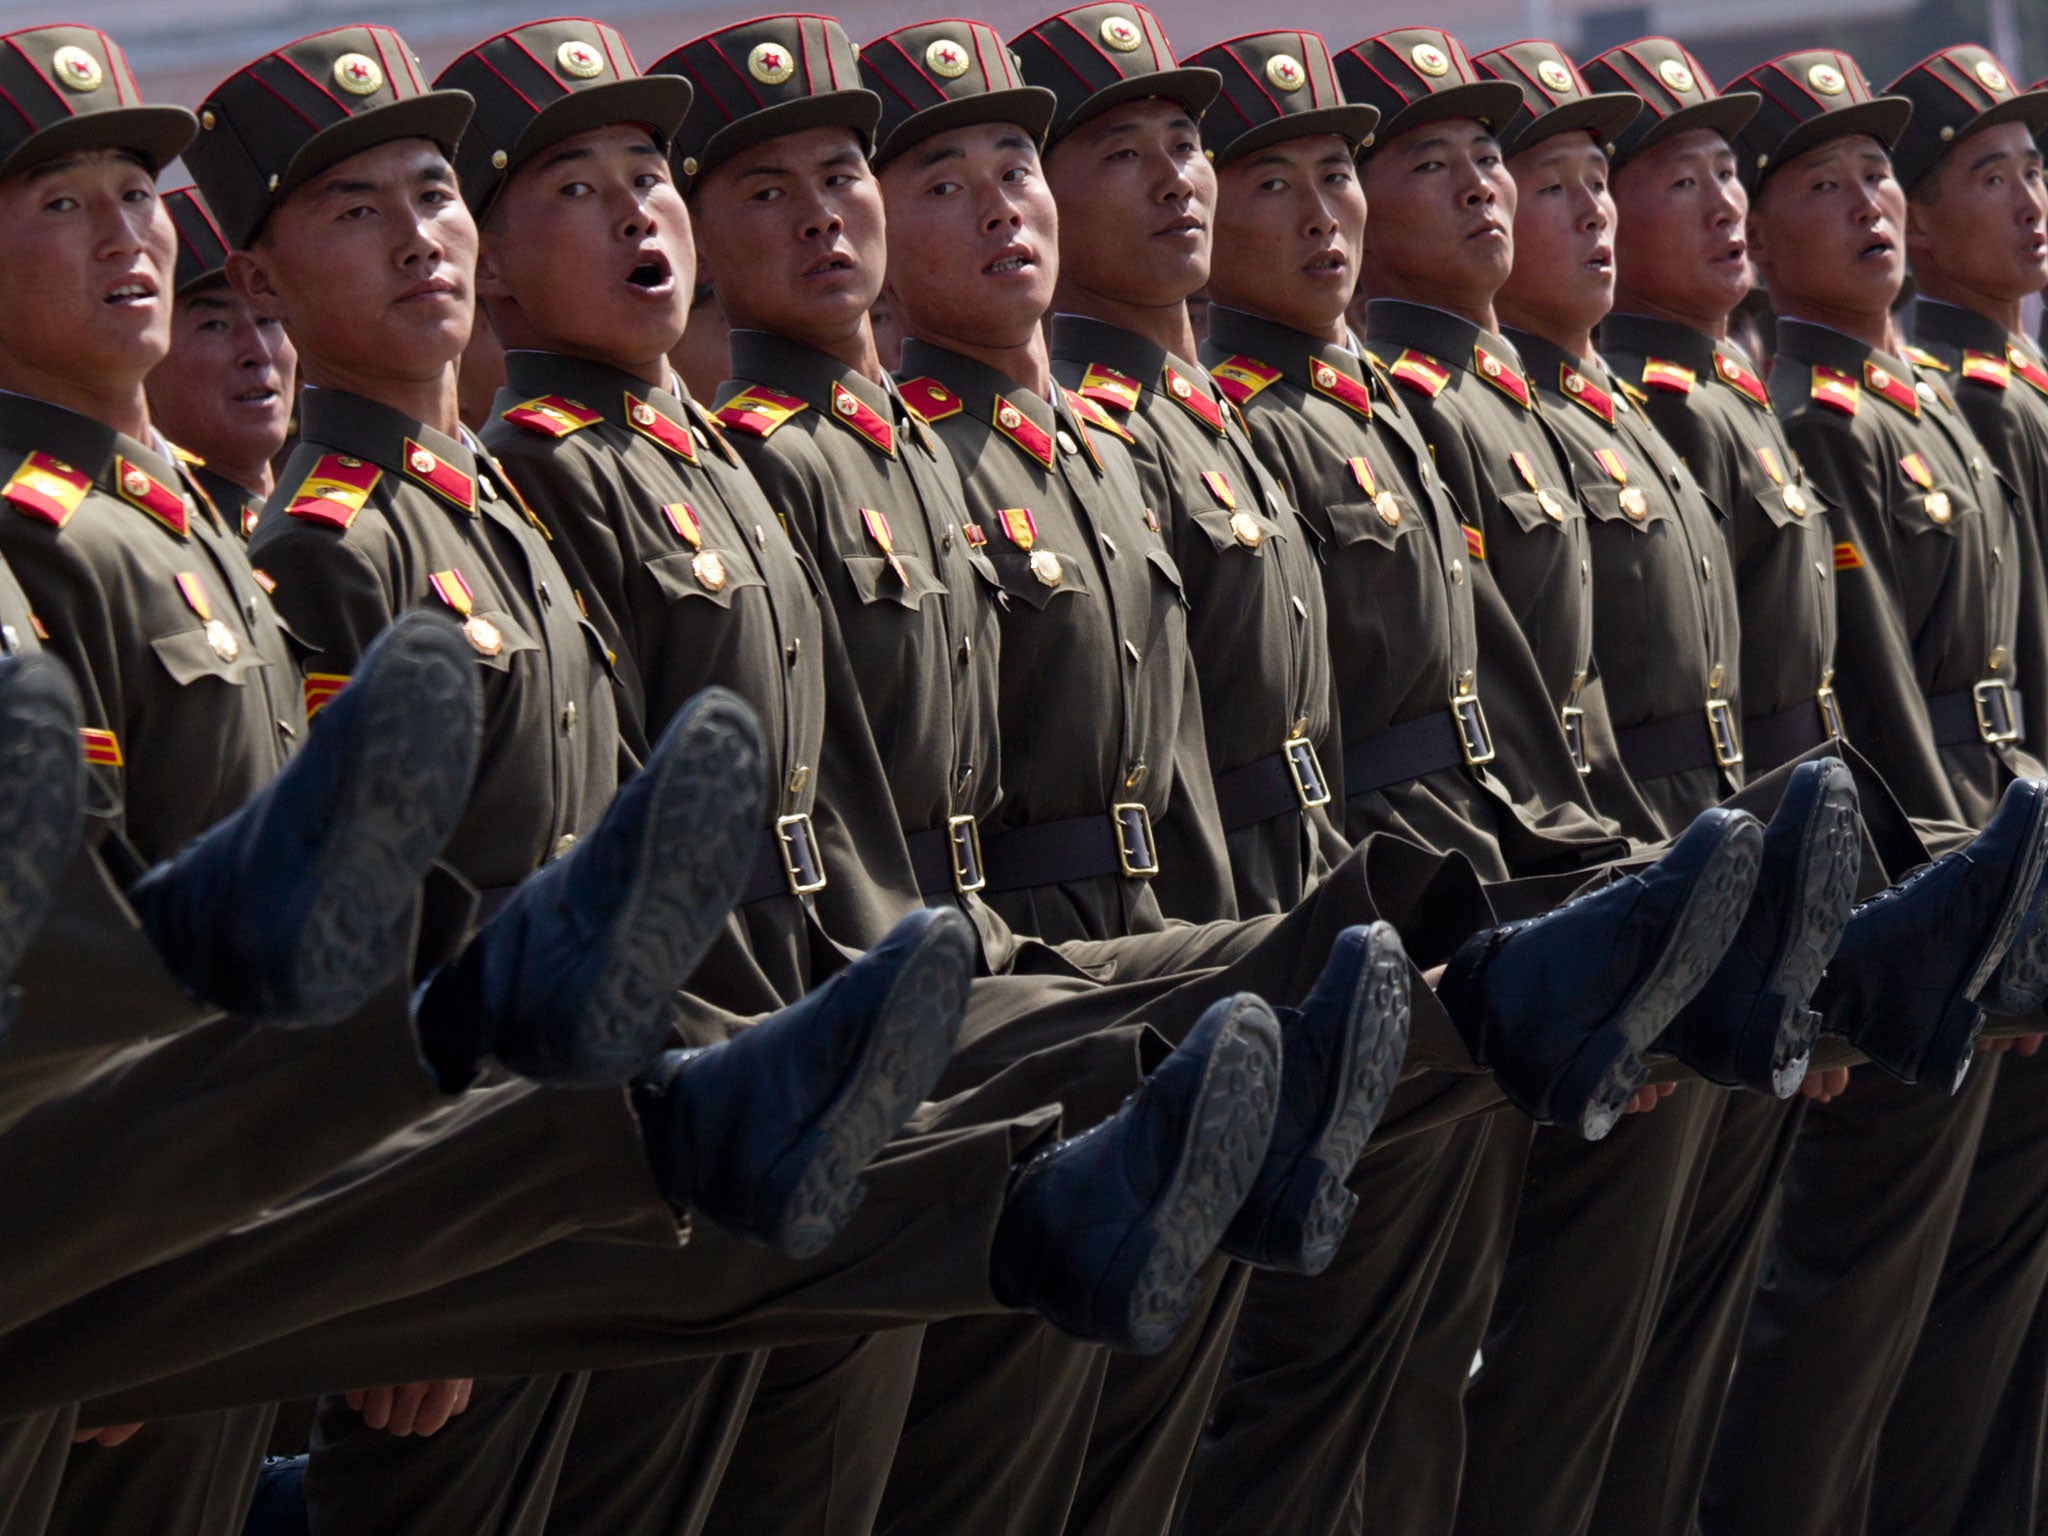 North Korean soldiers march during a military parade to mark 100 years since the birth of the country's founder Kim Il-Sung in Pyongyang on April 15, 2012.